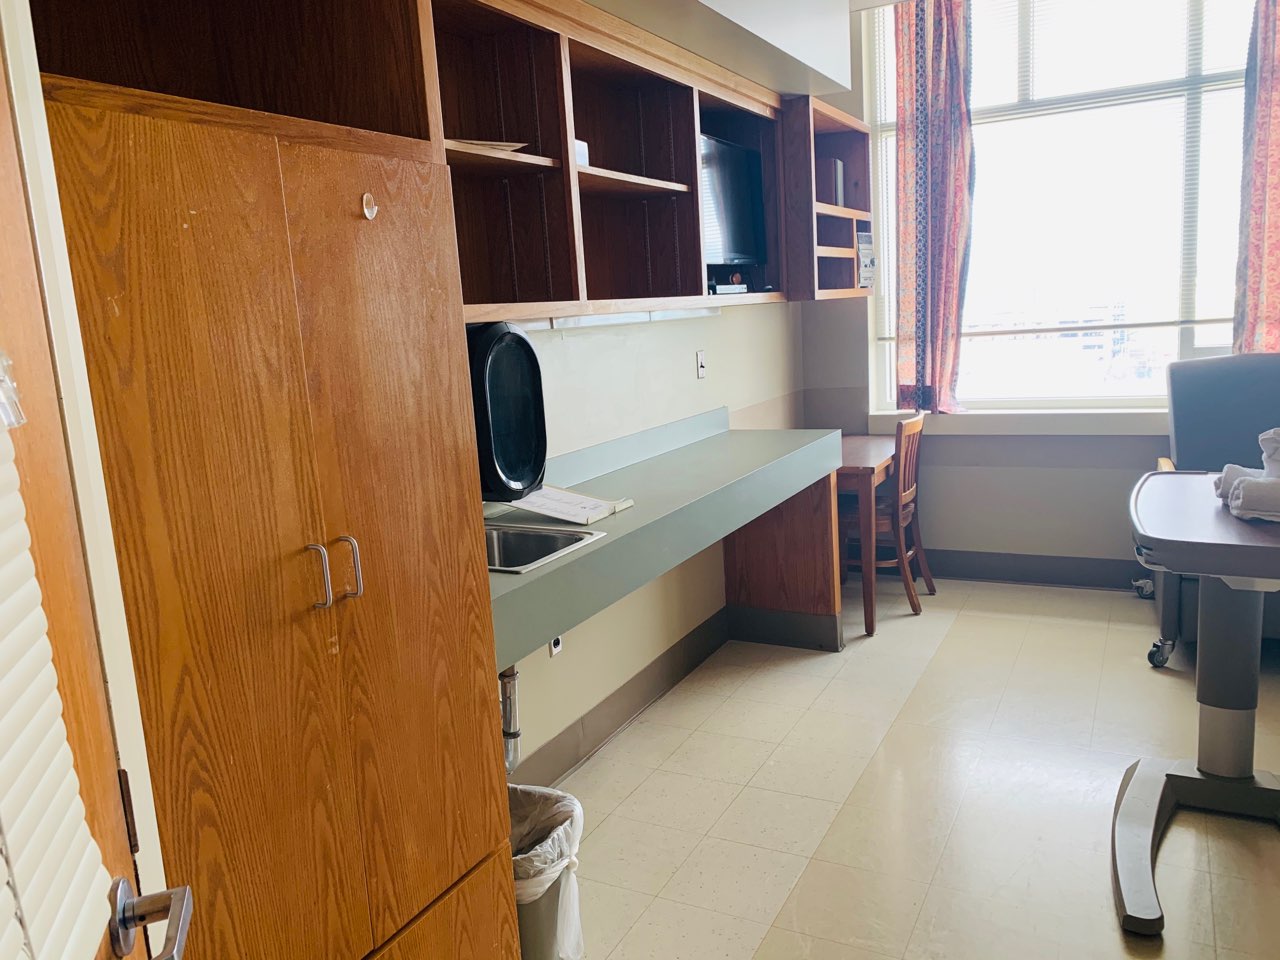 The entry to a patient room shows a closet and a sink near the door.